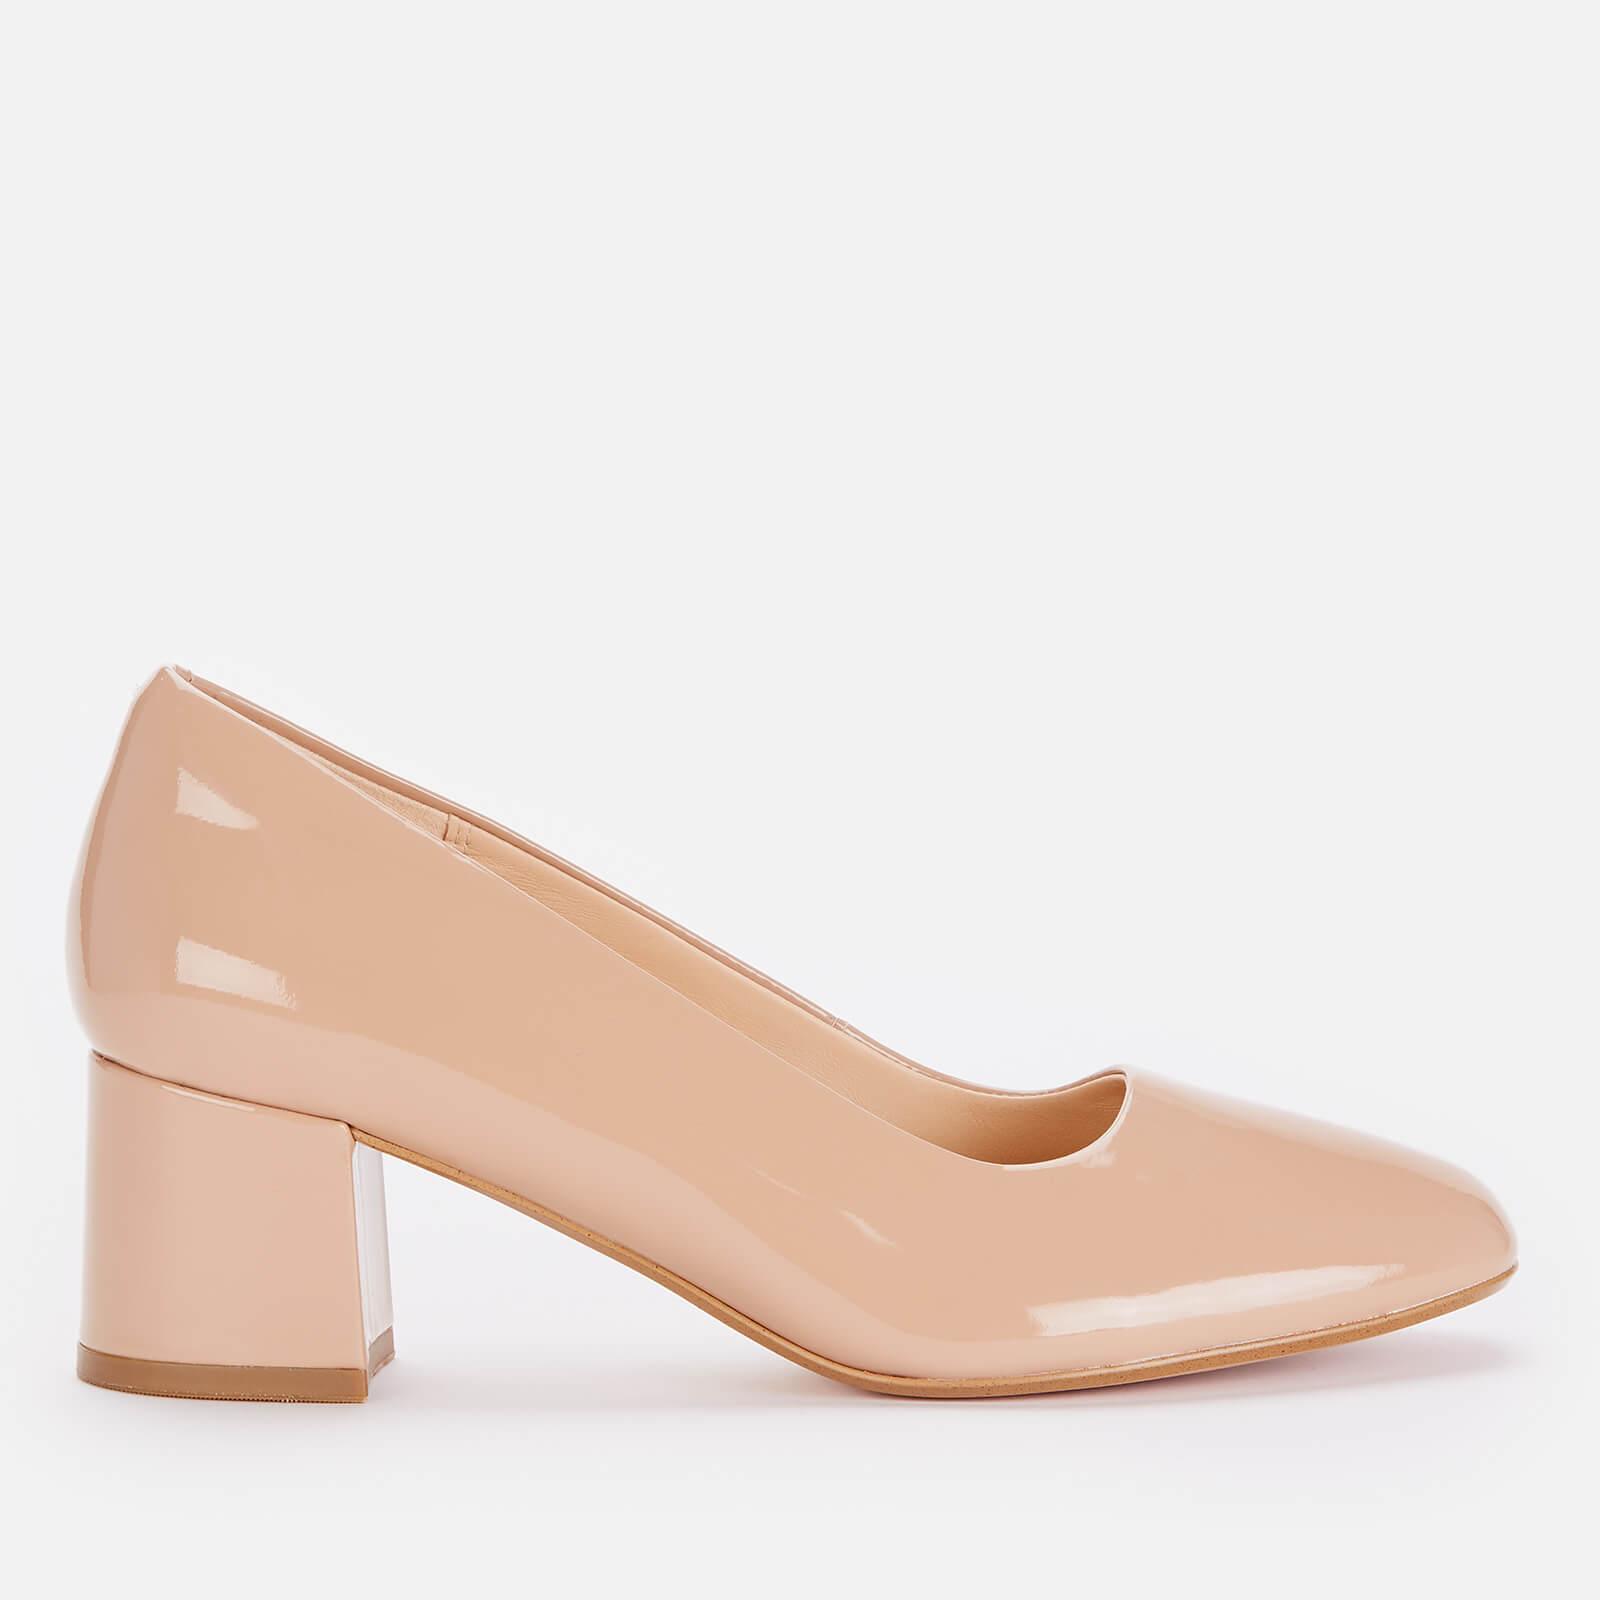 Clarks Leather Sheer 55 Patent Court Shoes in Nude (Brown) | Lyst